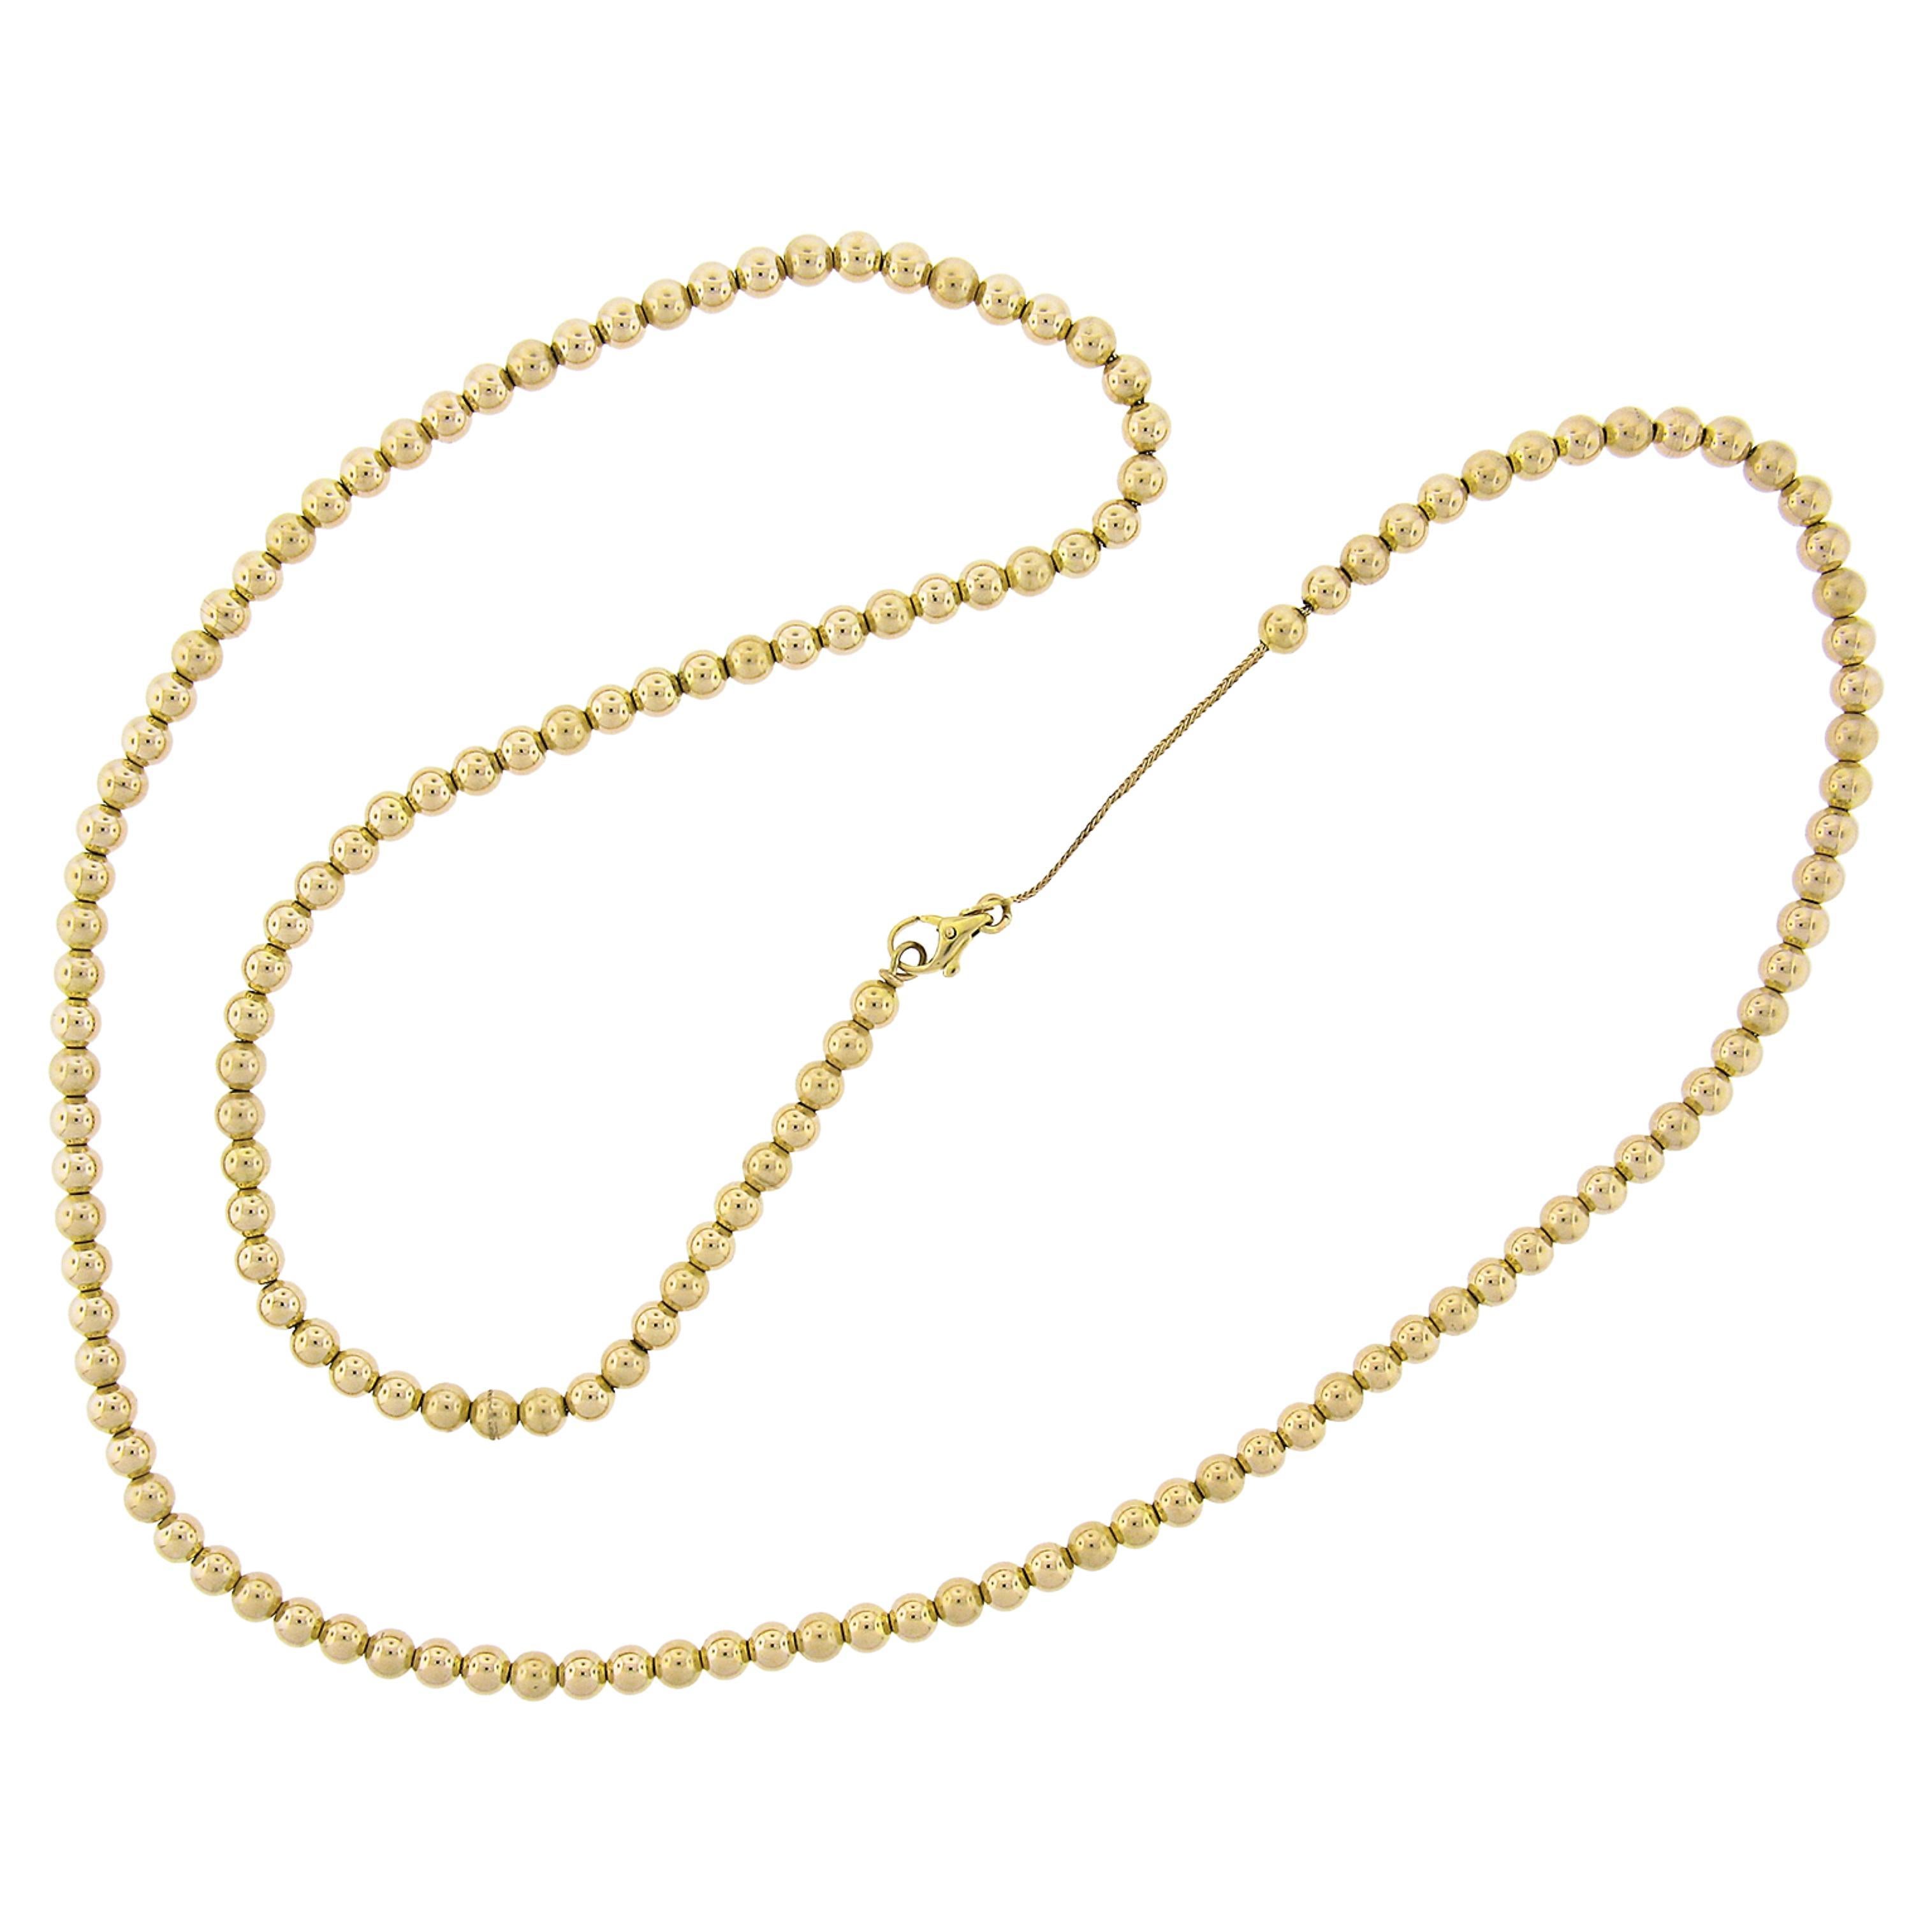 Vintage Italian 14k Gold Round Bead Ball on Wheat Link Chain Necklace